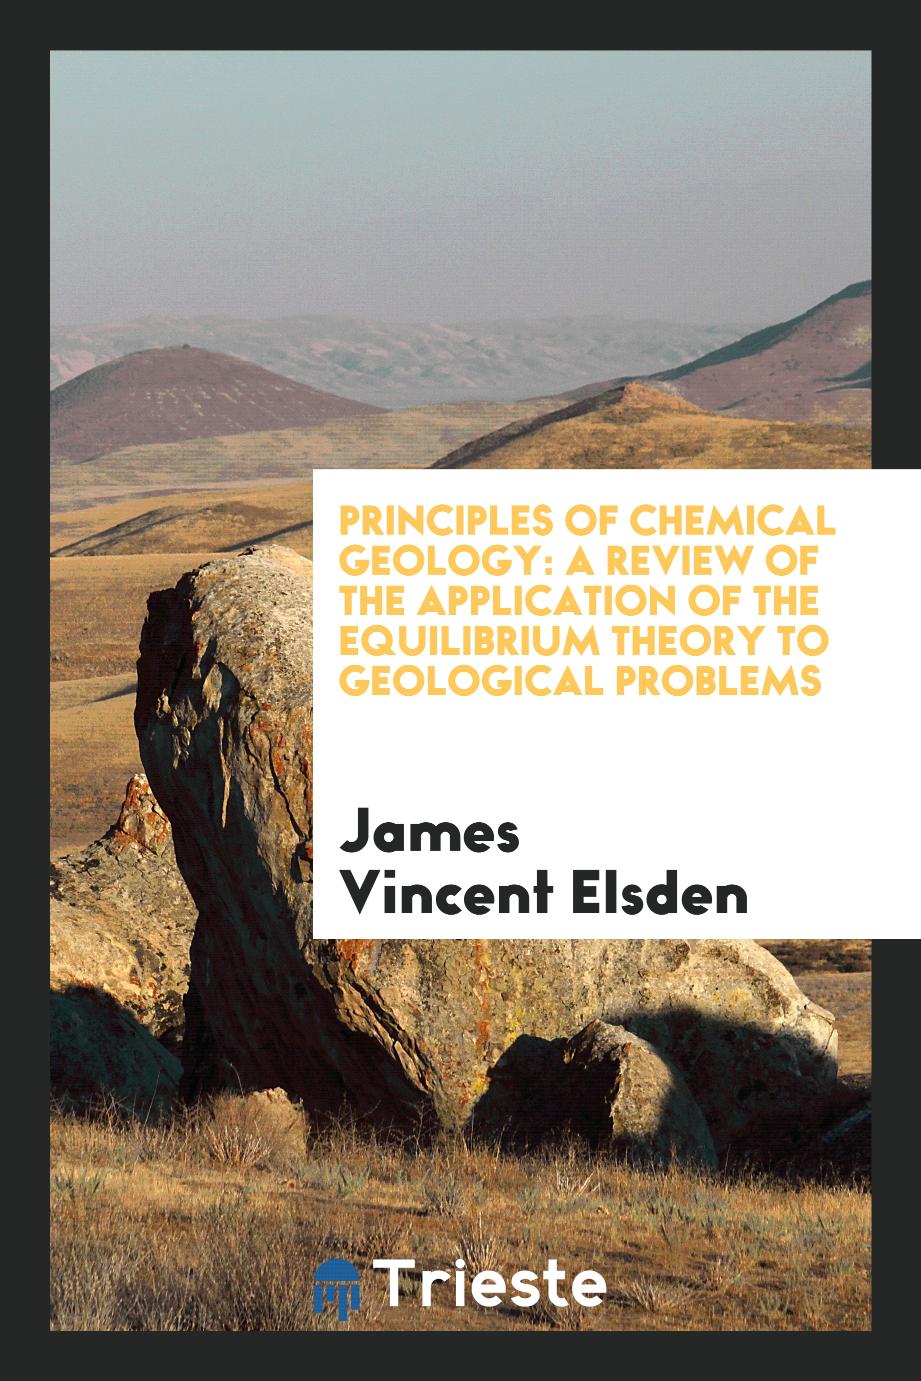 Principles of Chemical Geology: A Review of the Application of the Equilibrium Theory to Geological Problems